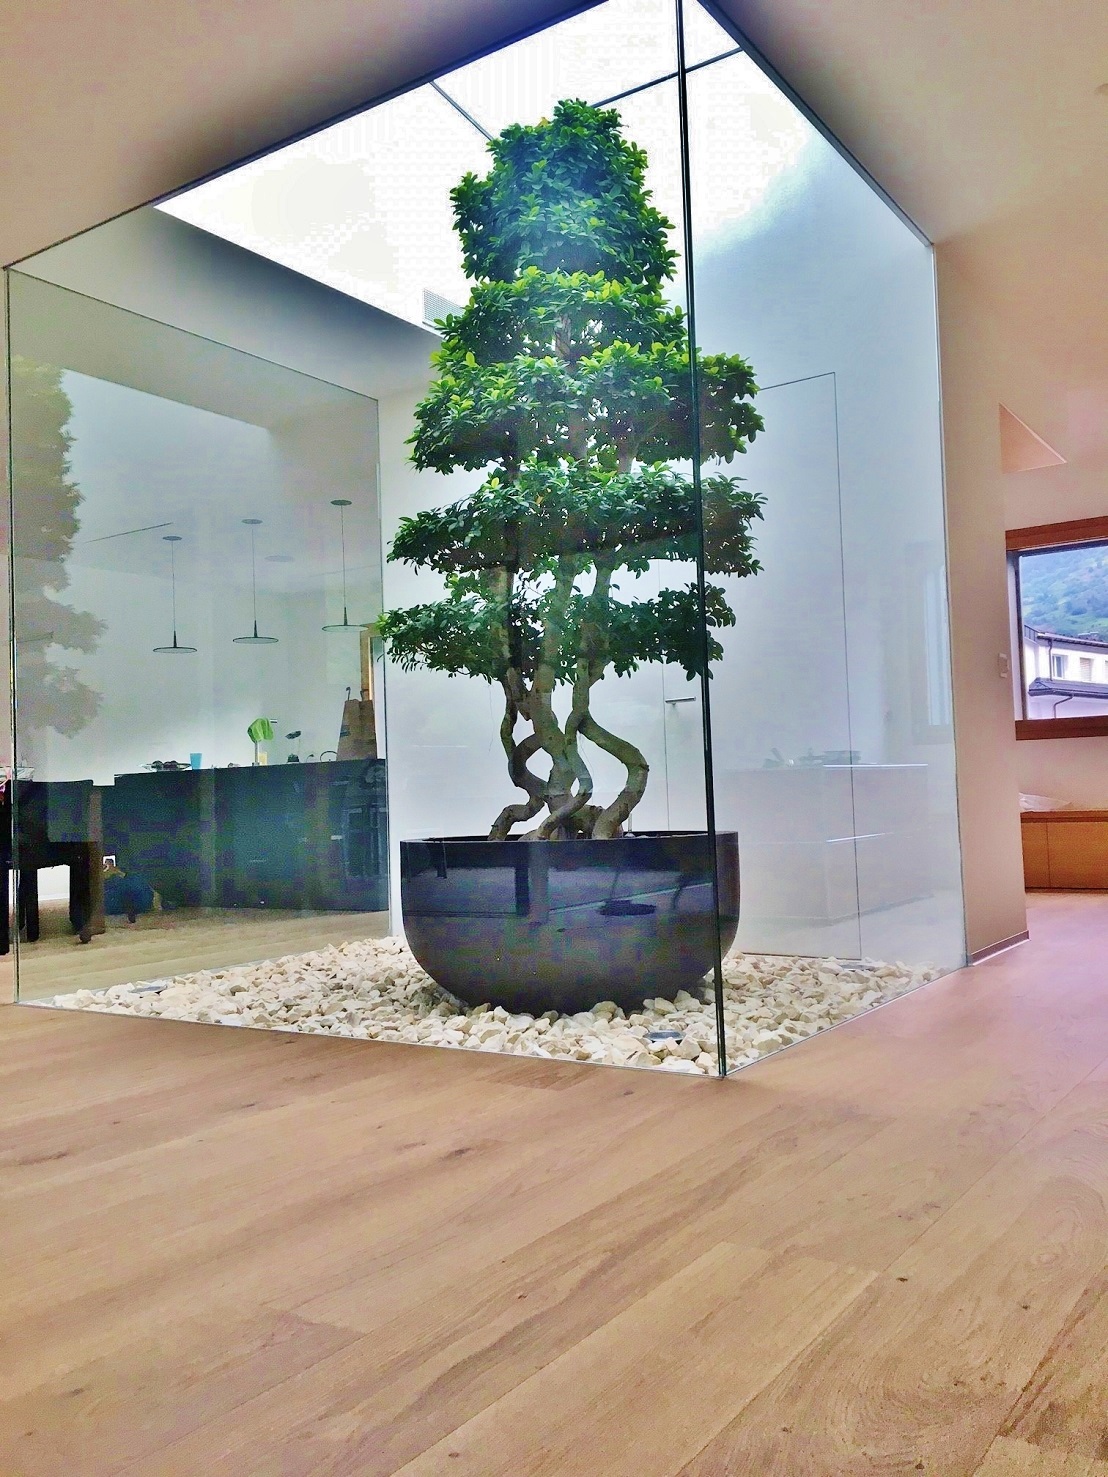 Ficus microcarpa planted in anthracite bottom vessel in the atrium buy online